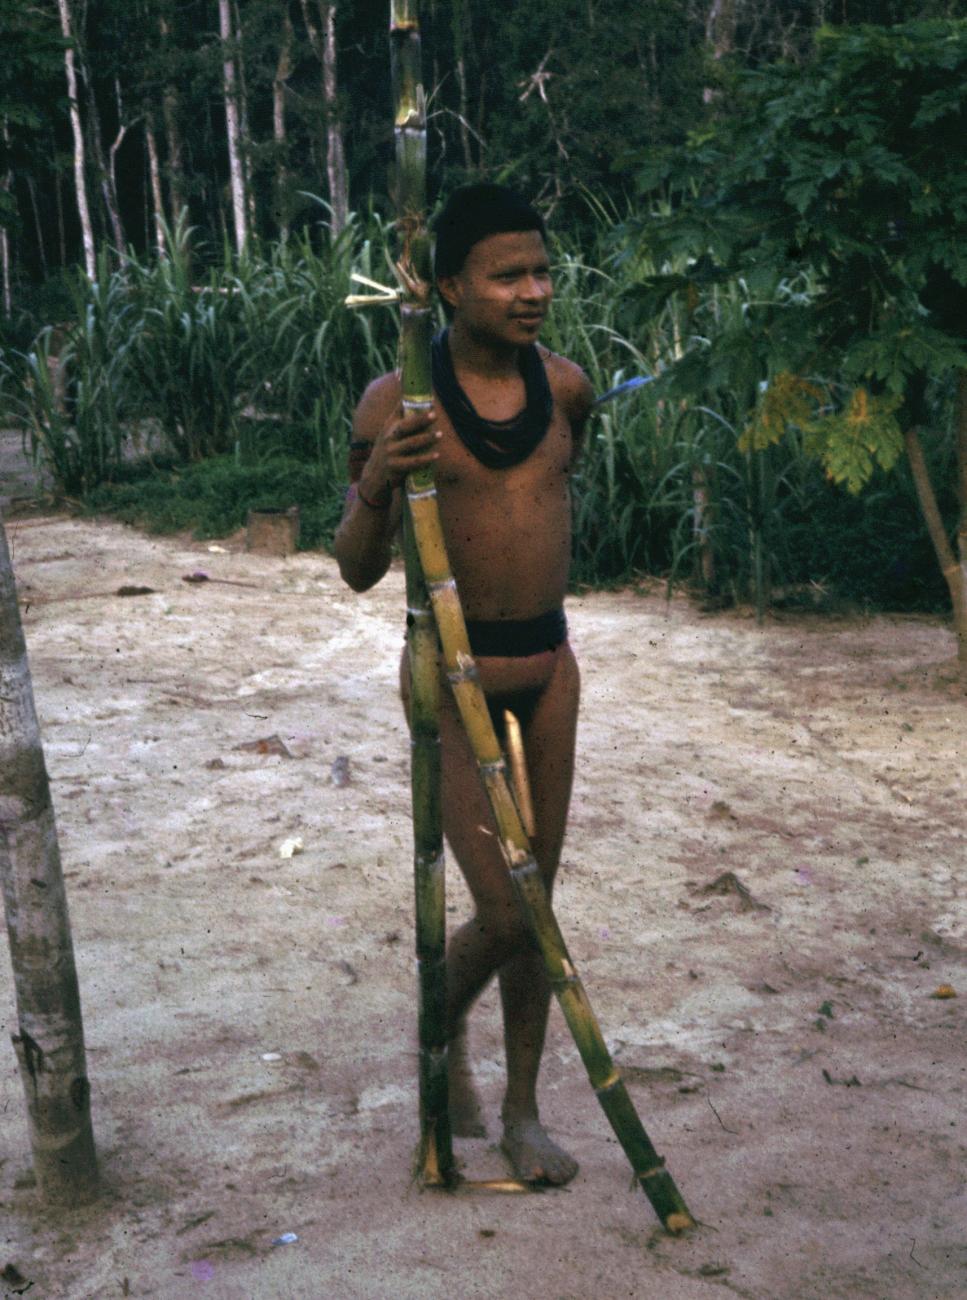 BD/66/6 - 
Young man with cane stalk
